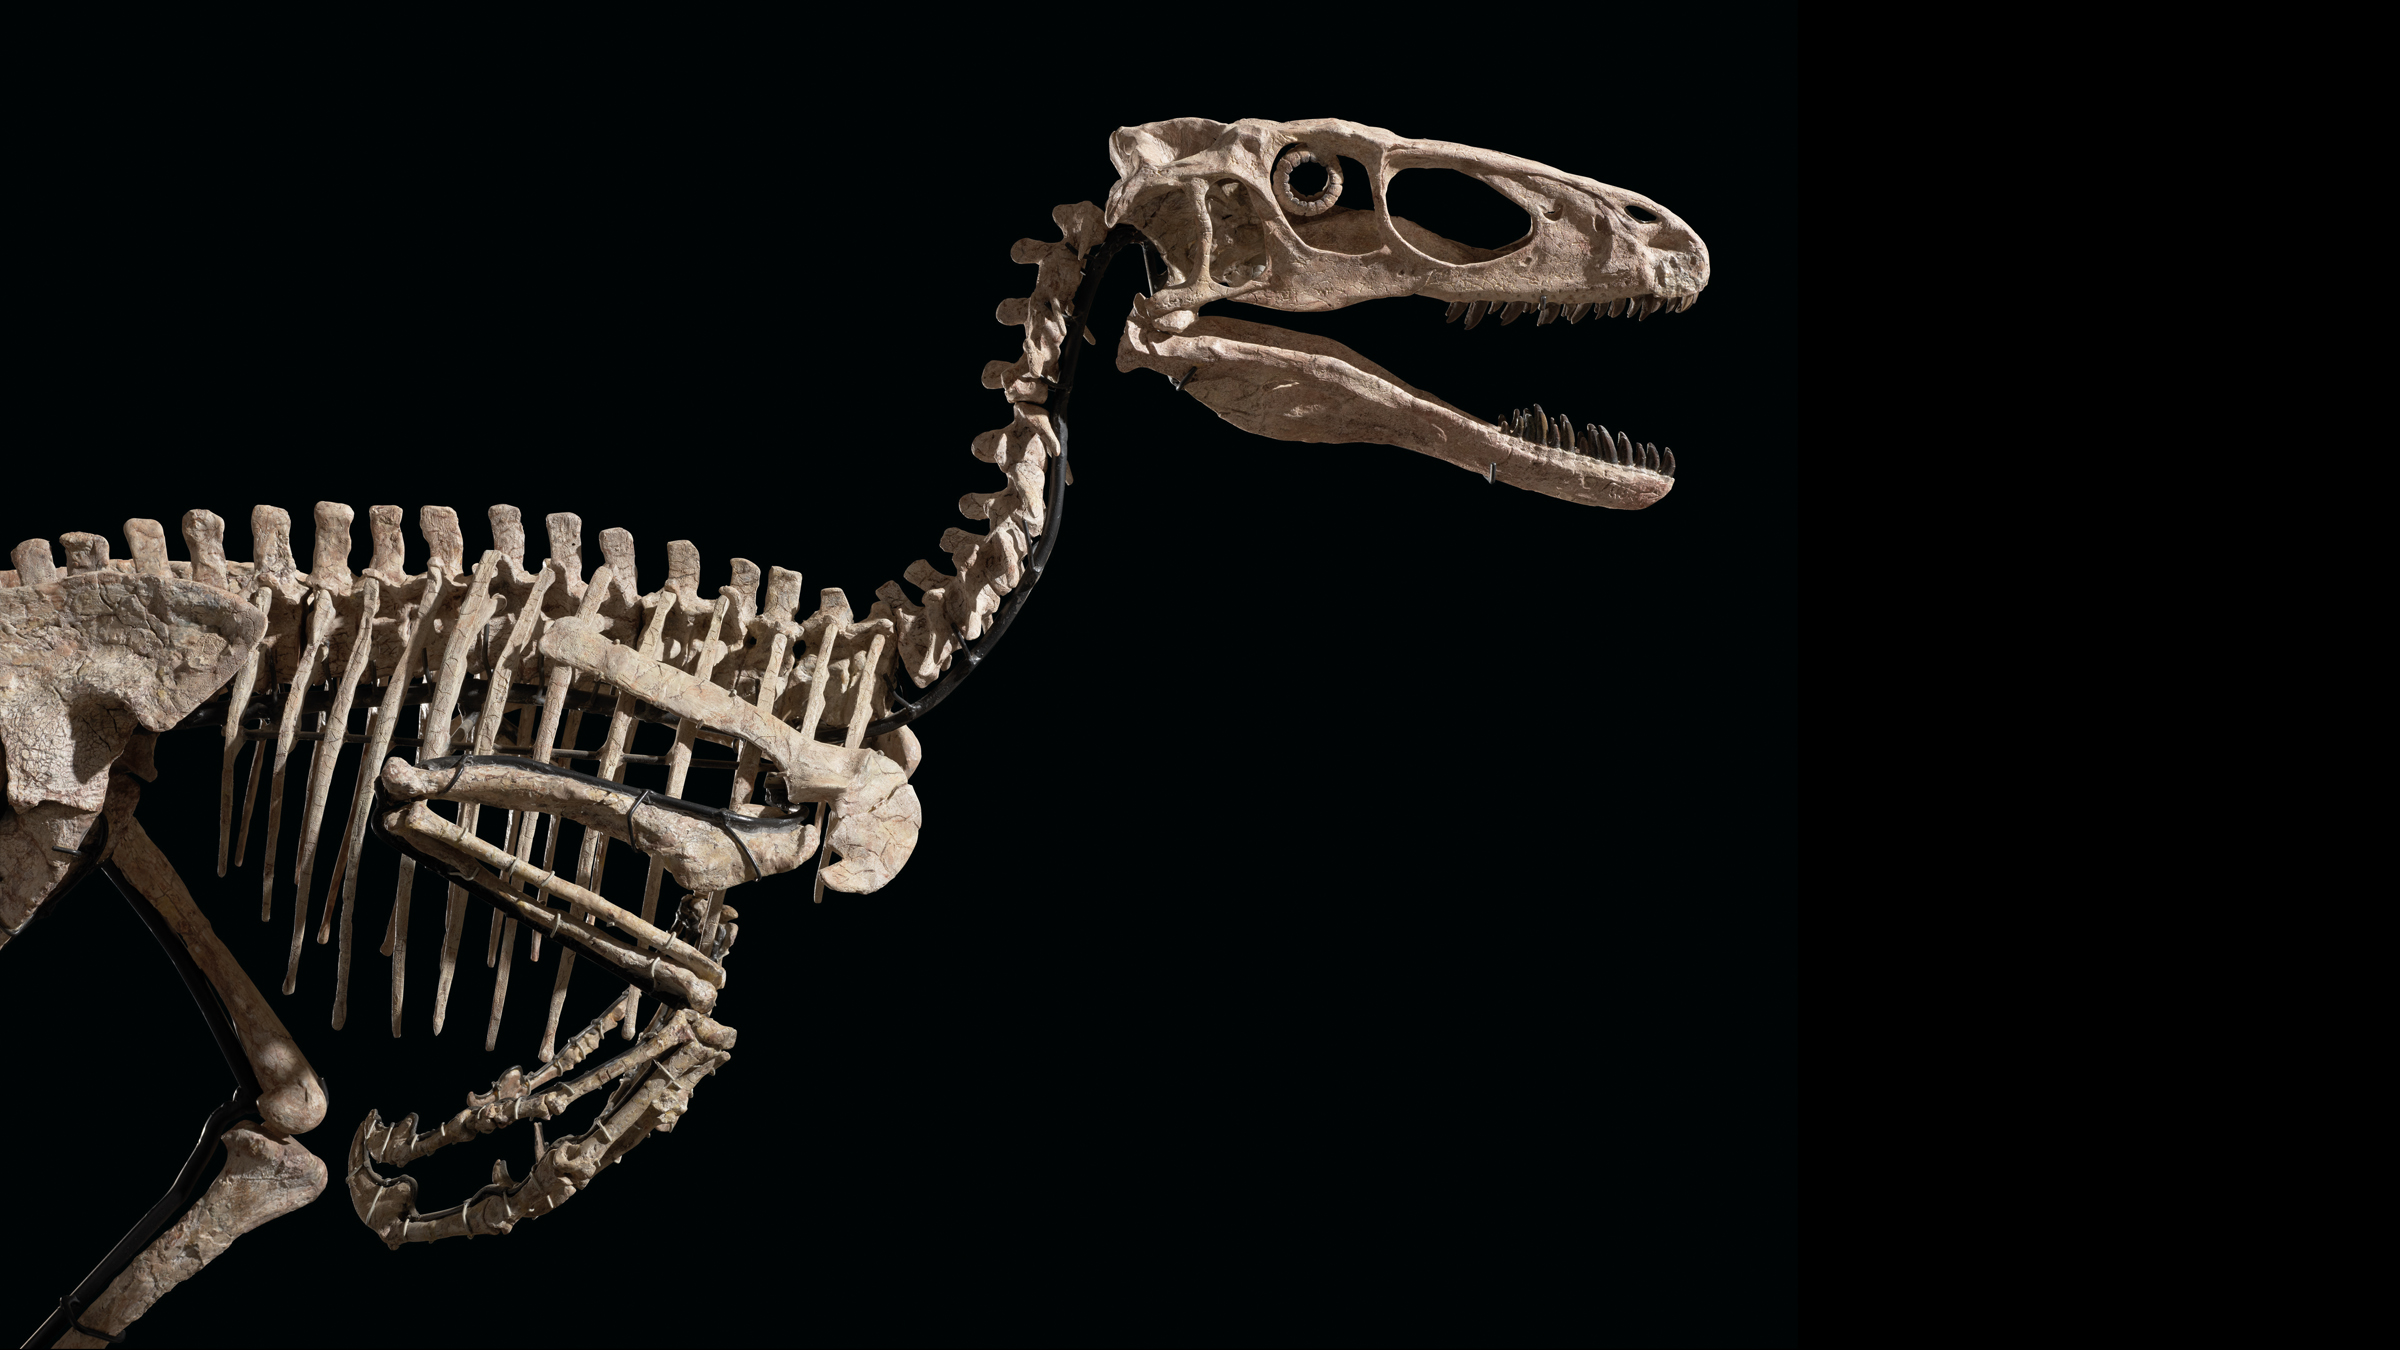 A photograph of the boneless head and shoulders of Deinonychus.